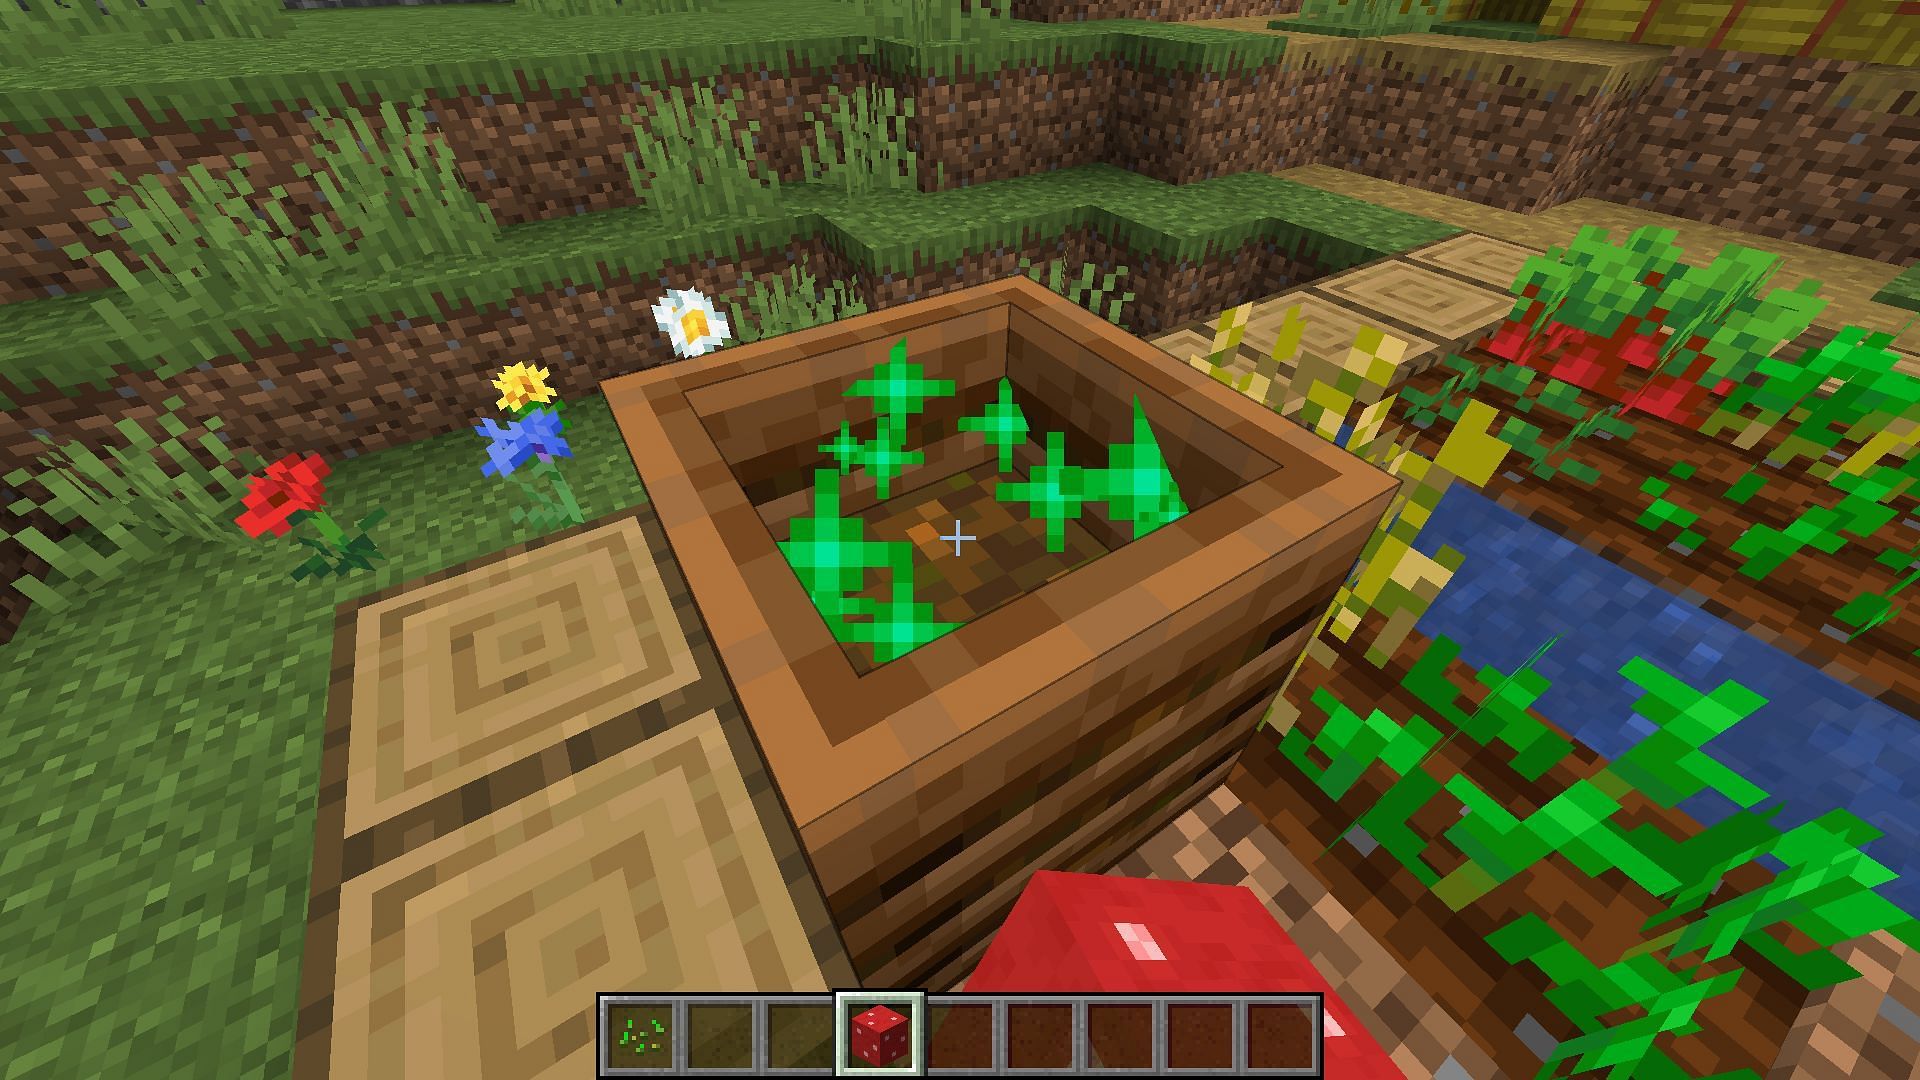 Poisonous potatoes can be thrown in a composter to produce bone meal (Image via Mojang Studios)